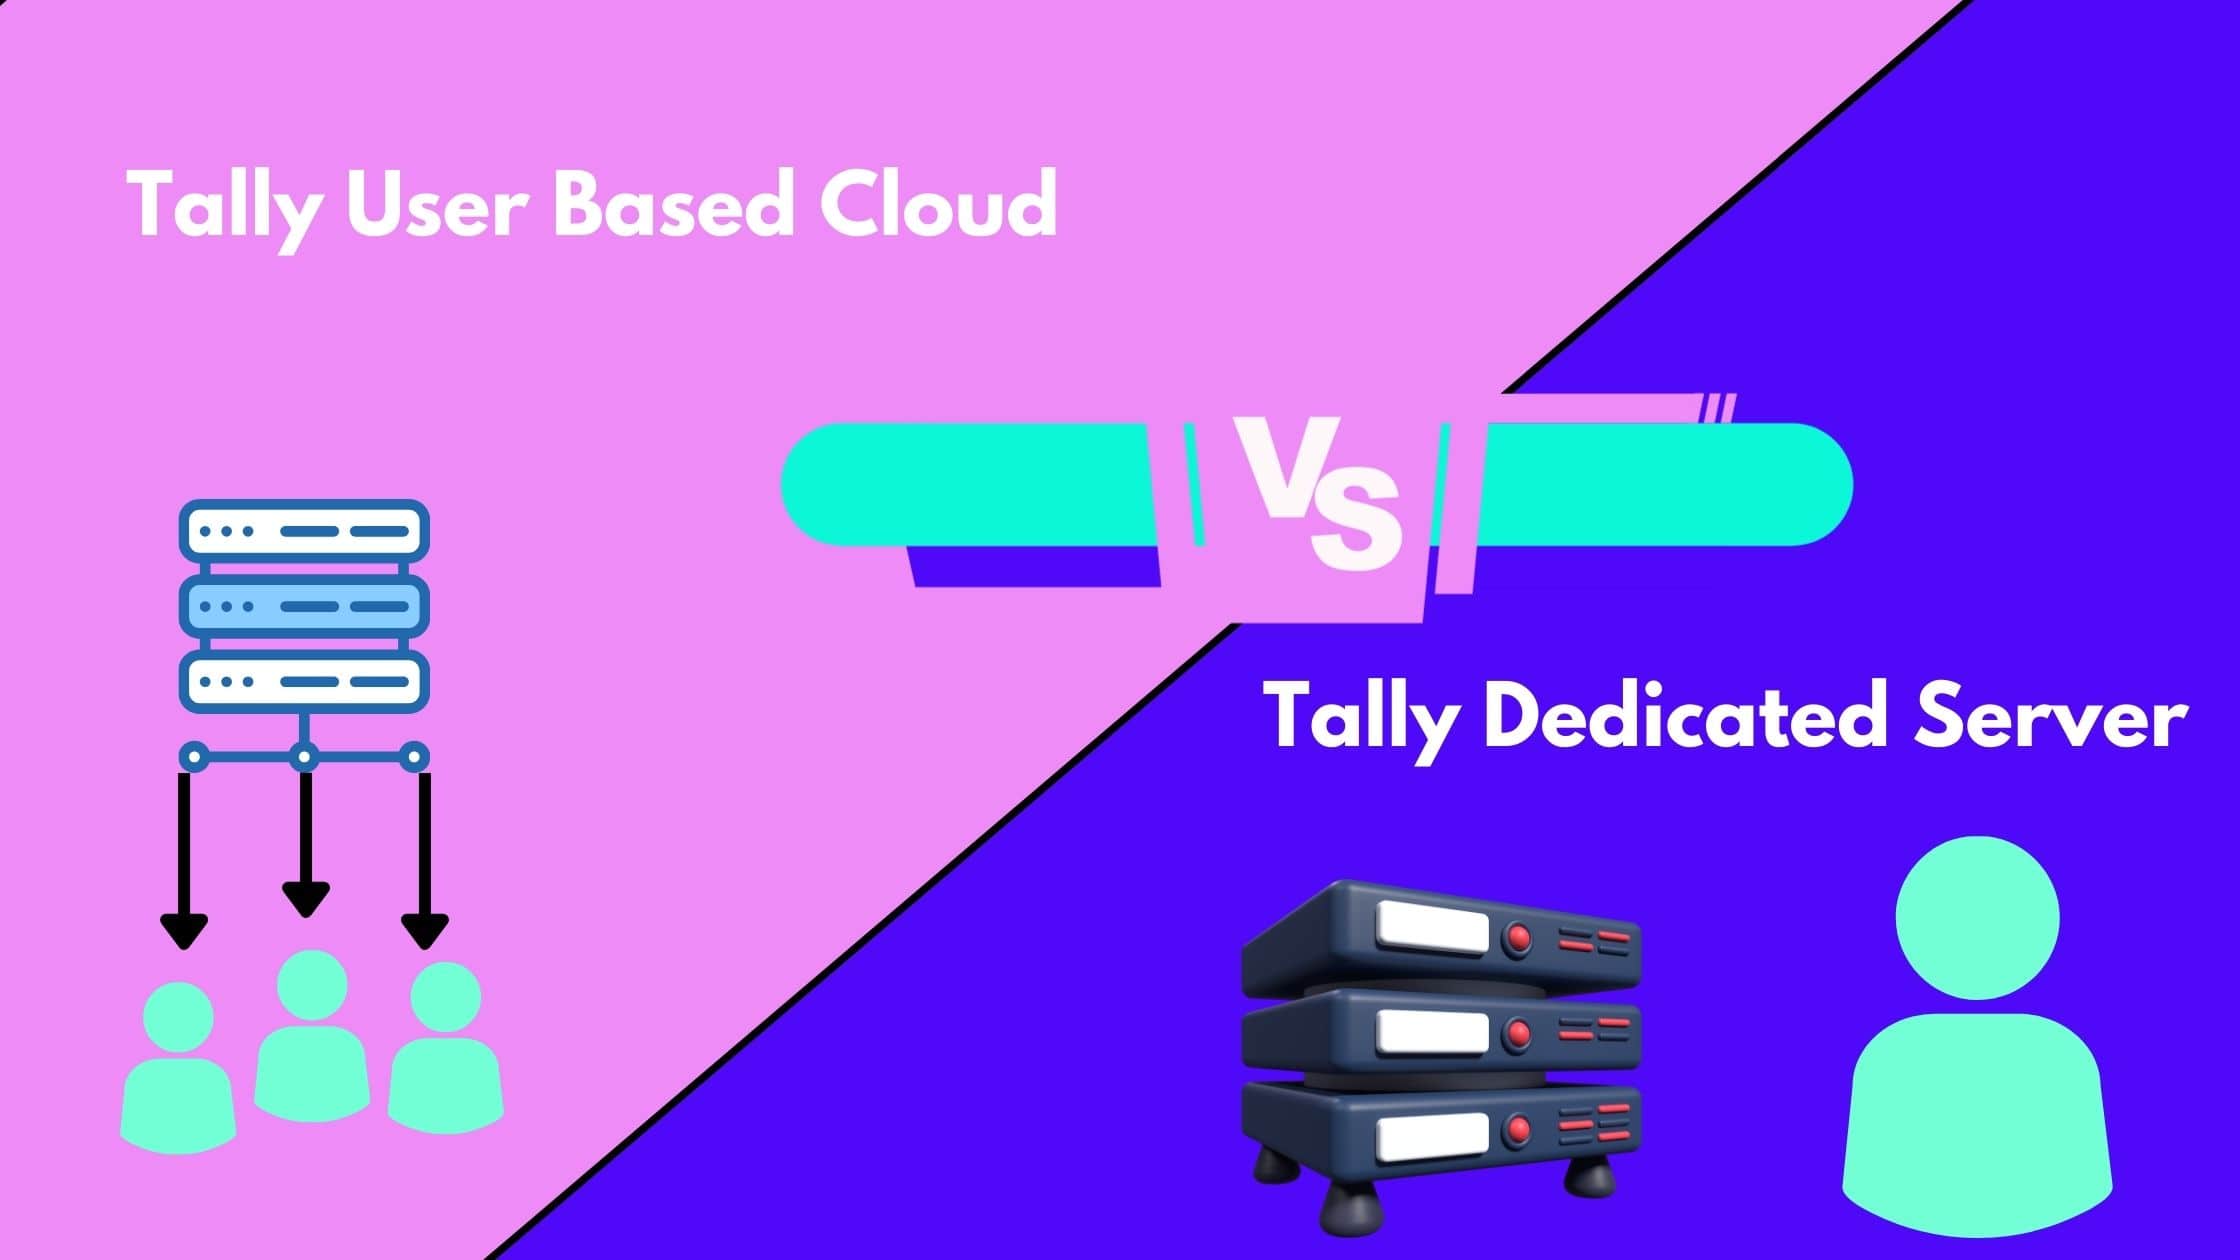 Comparison between Tally user-based cloud and Tally dedicated servers.